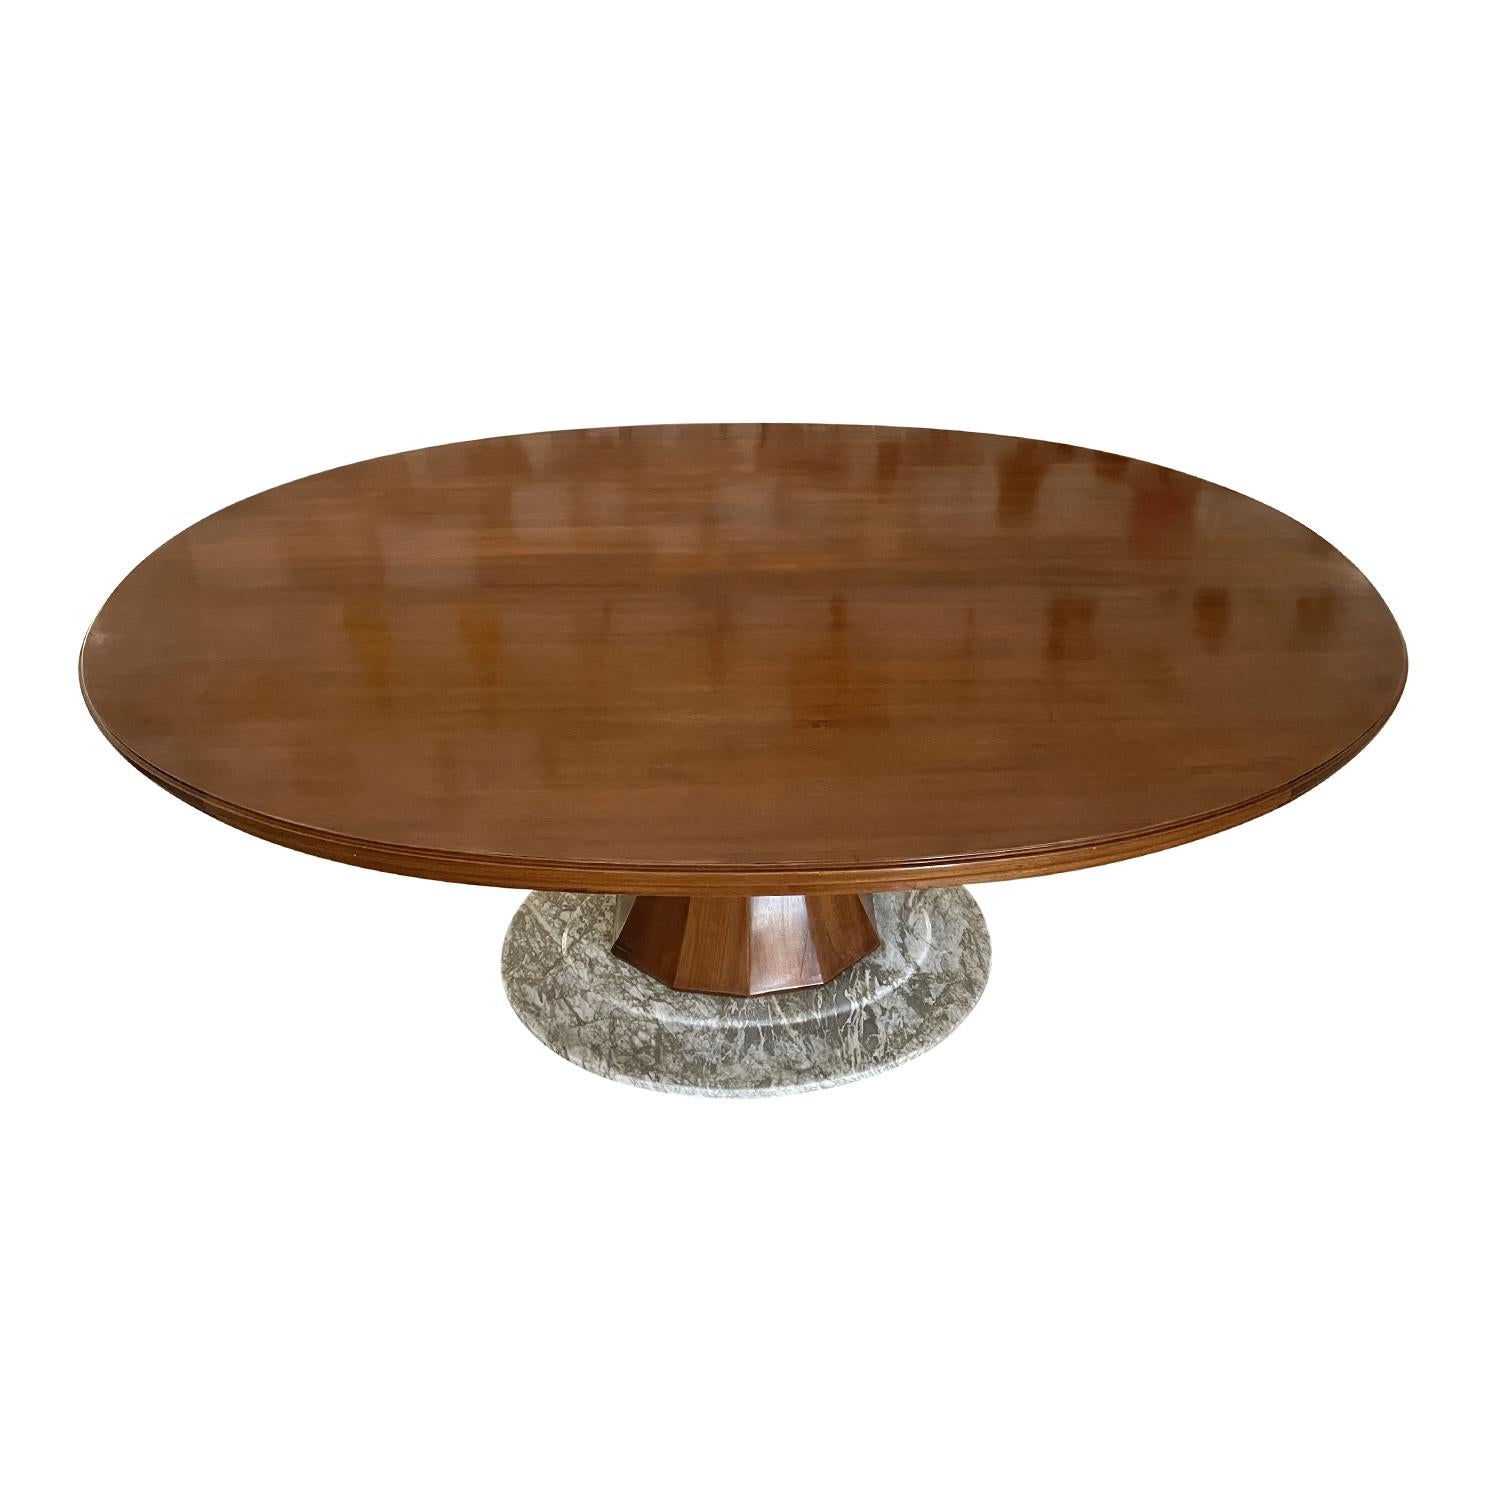 A dark-brown, large vintage Mid-Century Modern Italian oval dining table made of hand crafted polished Rosewood, designed by Vittorio Dassi in good condition. The thick table top is supported by a white-grey marble base, enhanced by detailed wood